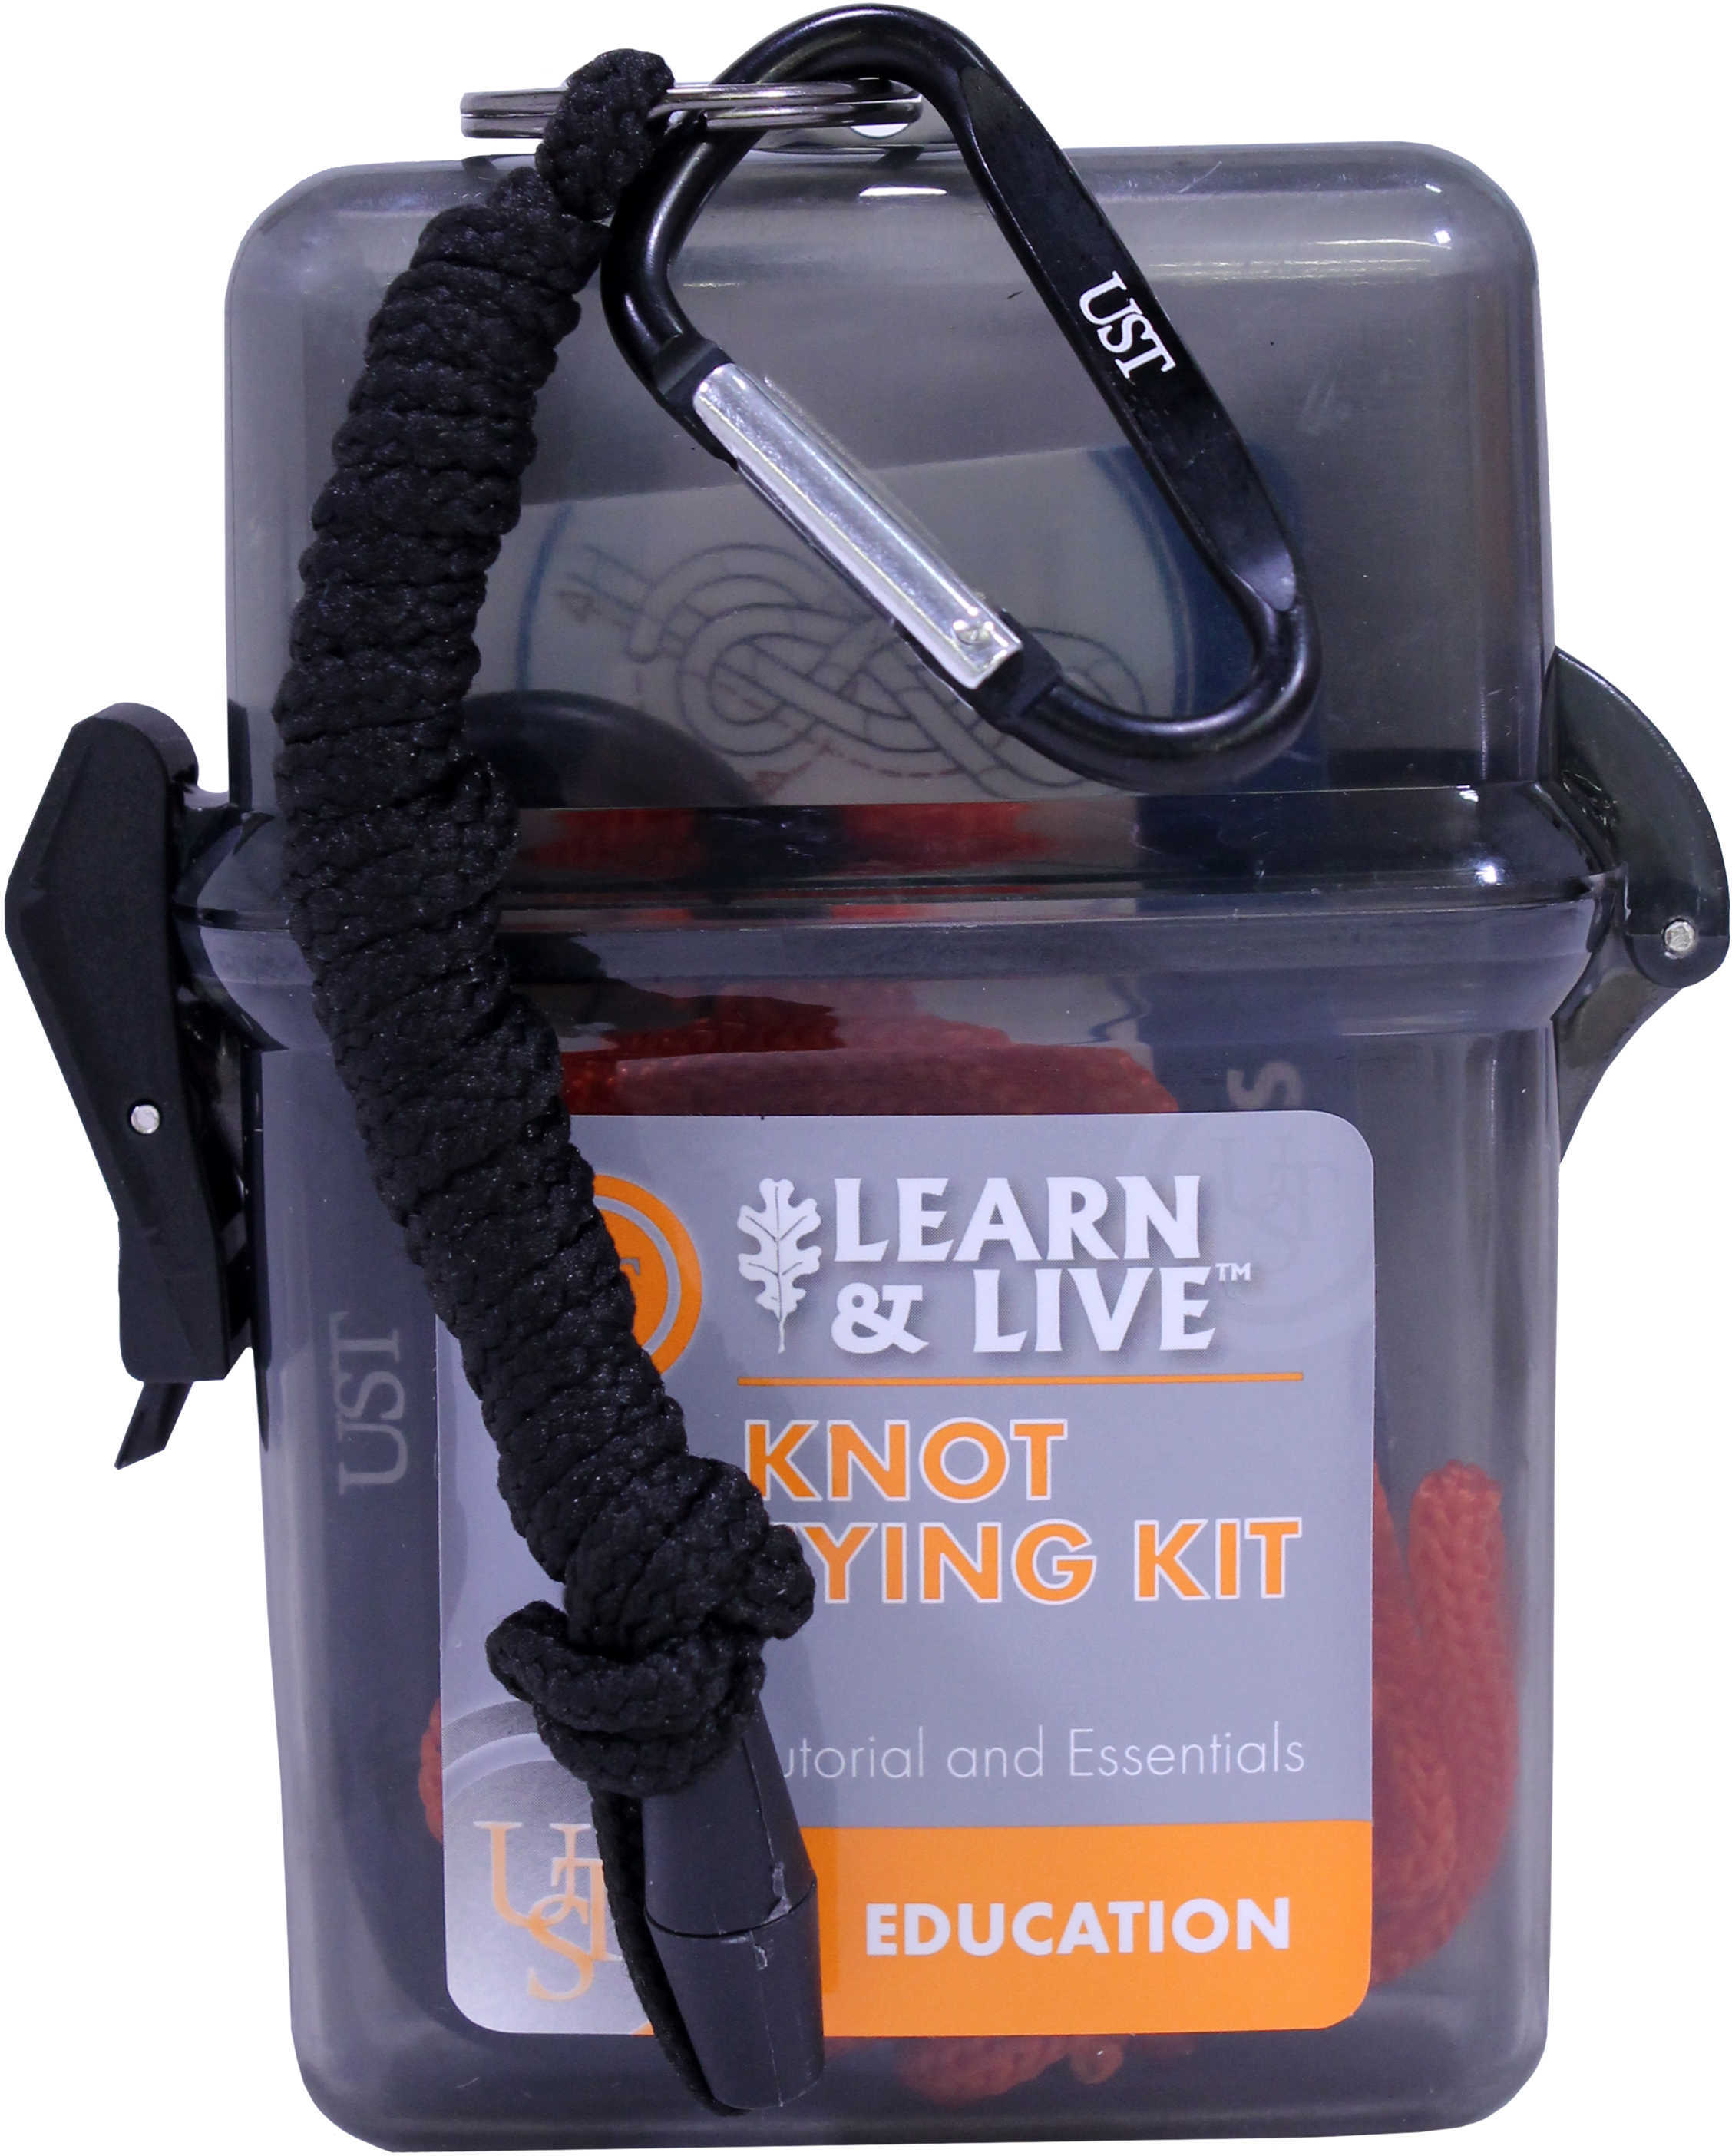 Ultimate Survival Technologies Learn and Live Knot Tying Kit Md: 20-02759